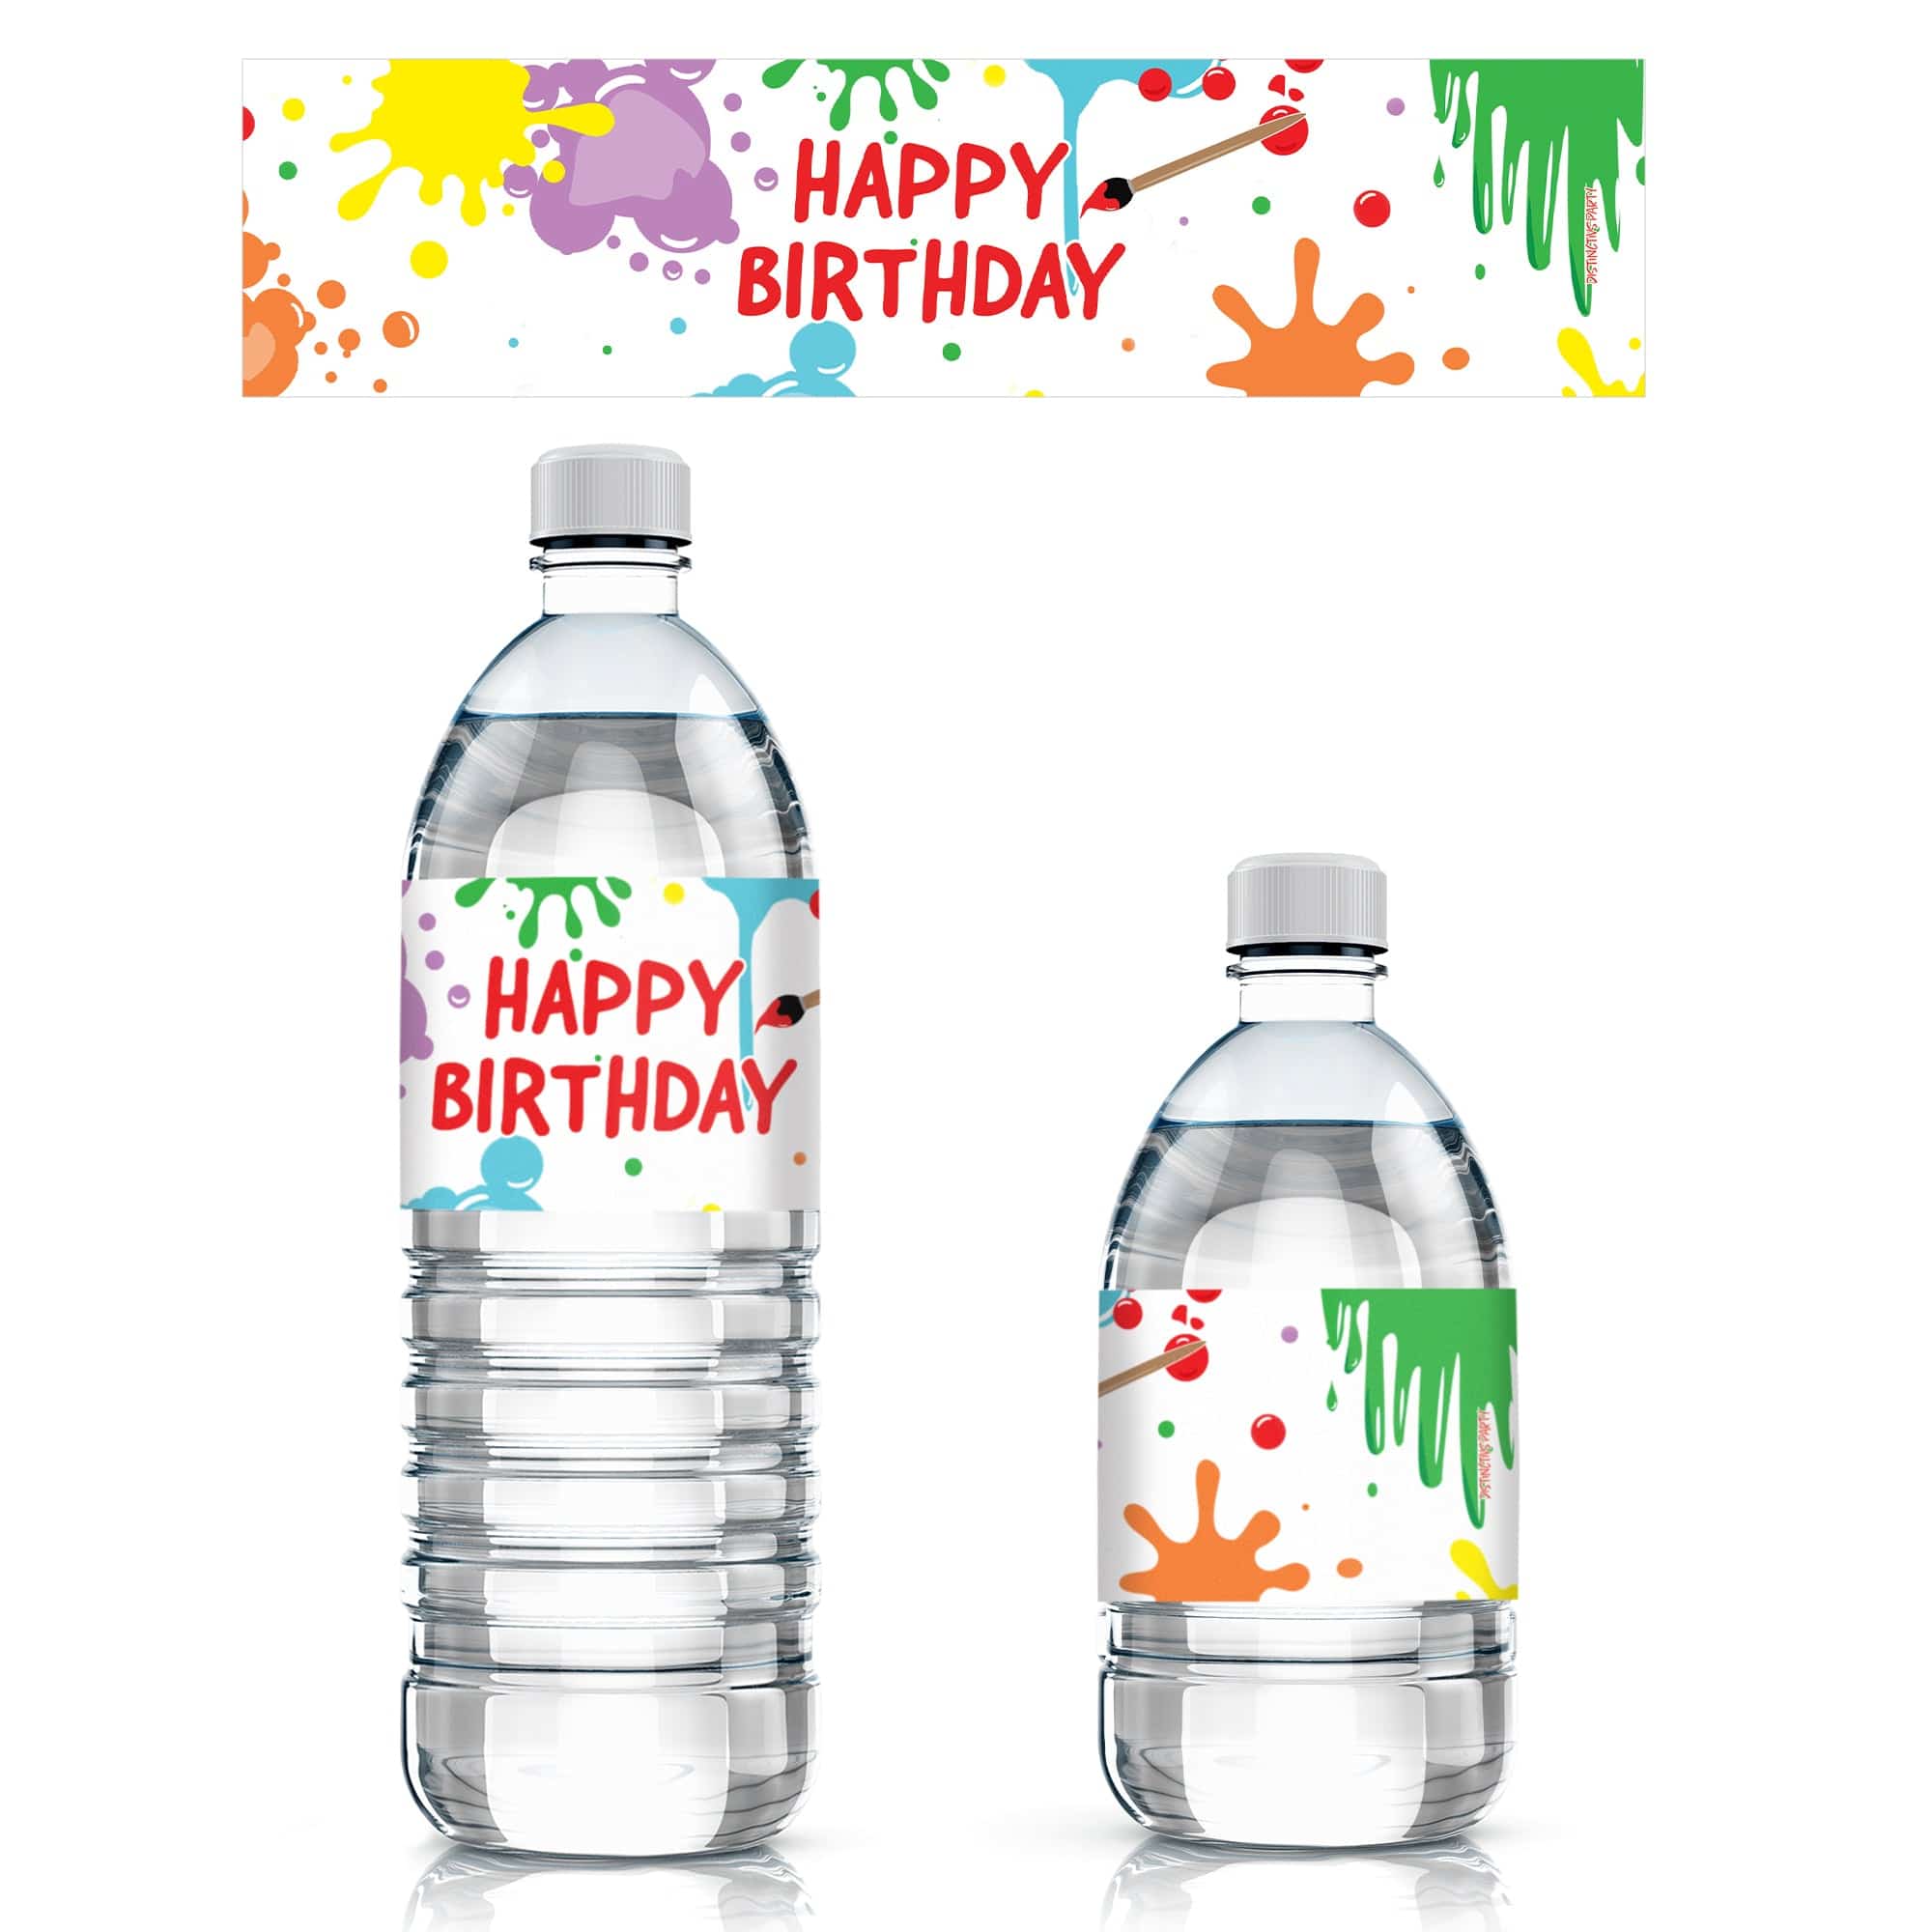 Art Birthday Party Water Bottle Labels - Paint and Party - 24 Stickers